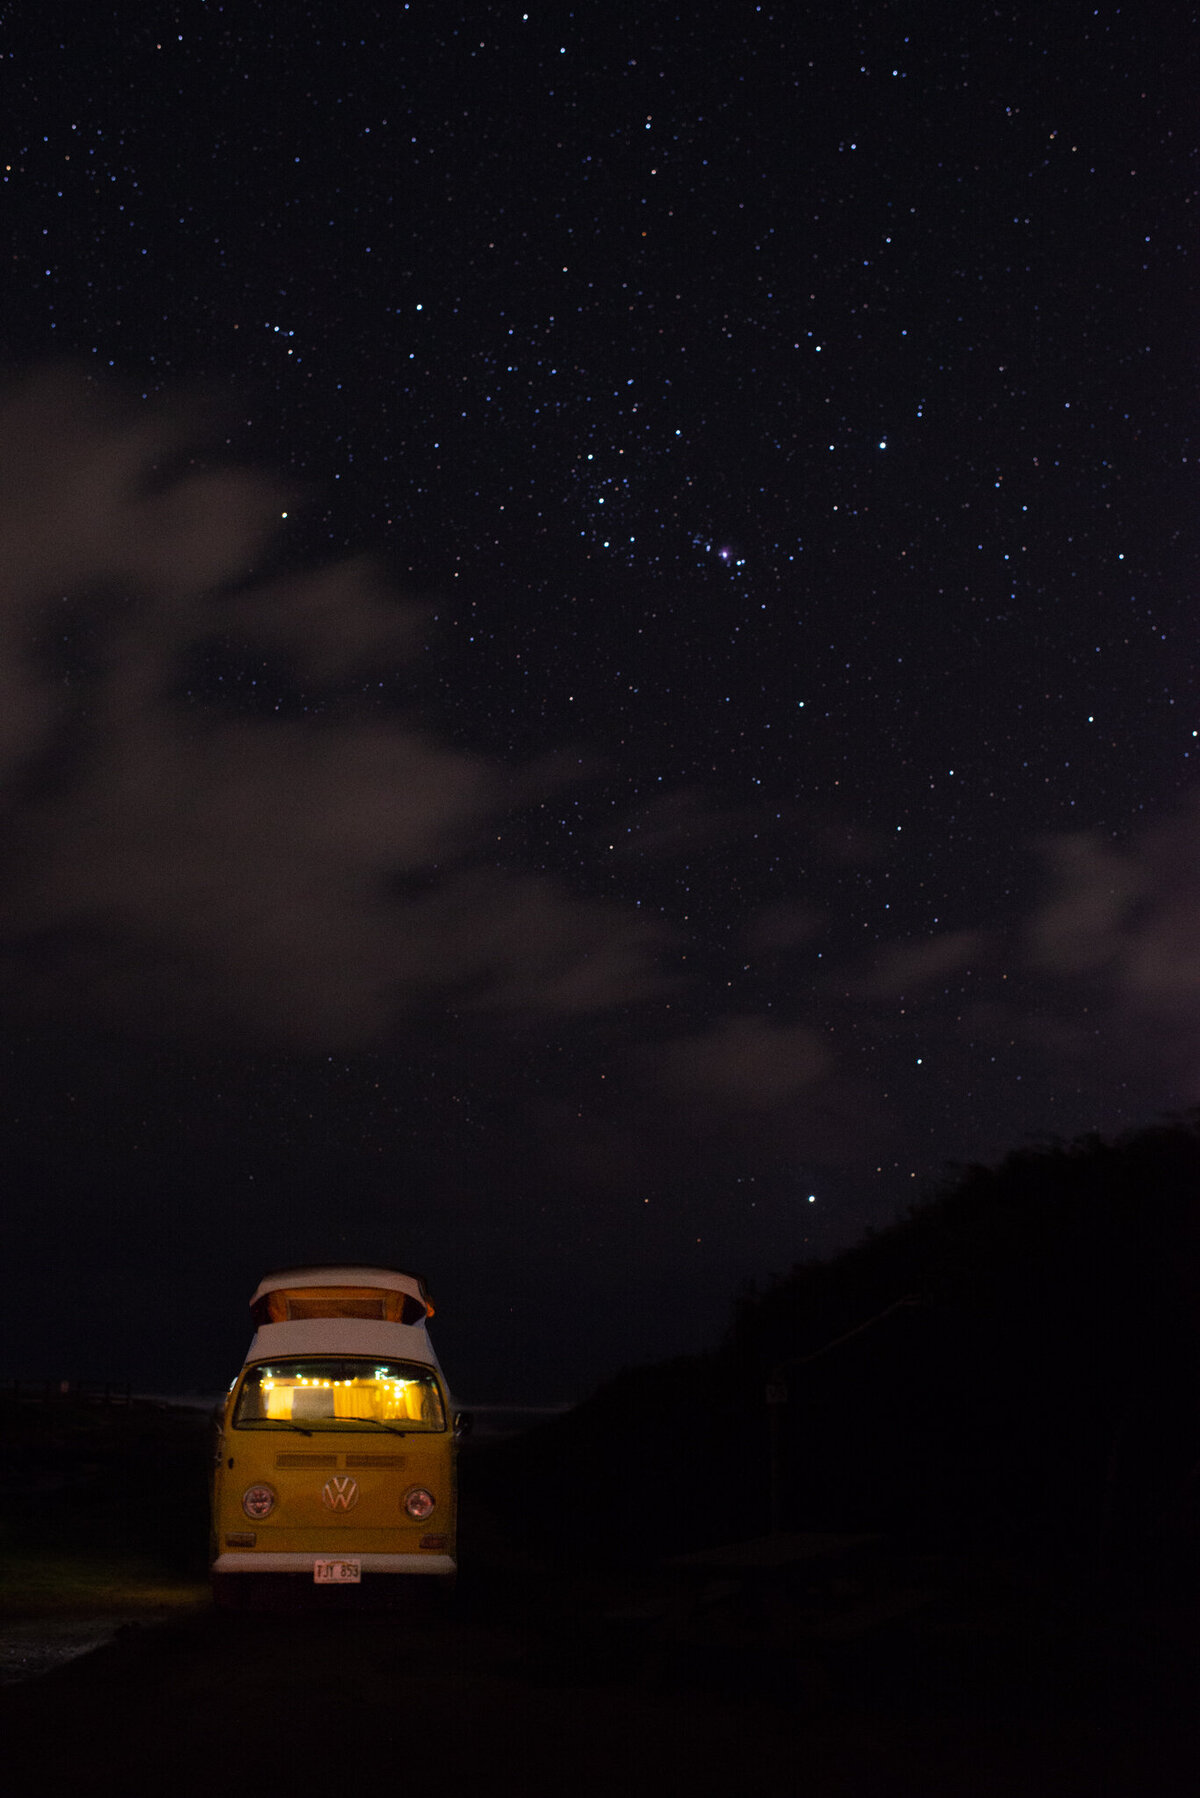 Hawaii VW bus camping under the stars